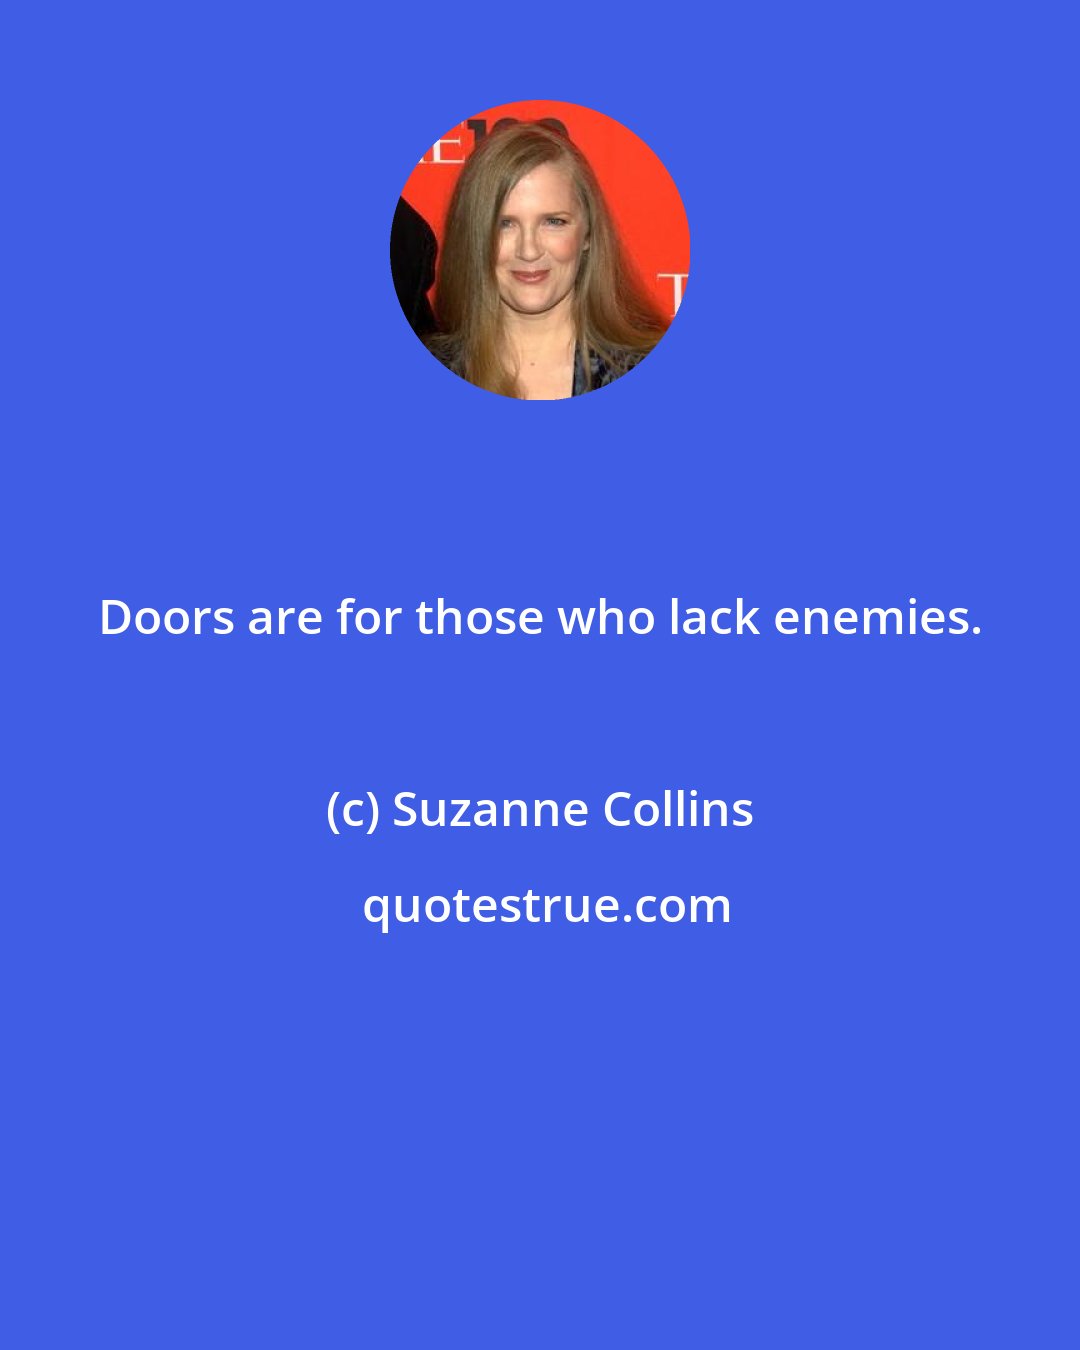 Suzanne Collins: Doors are for those who lack enemies.